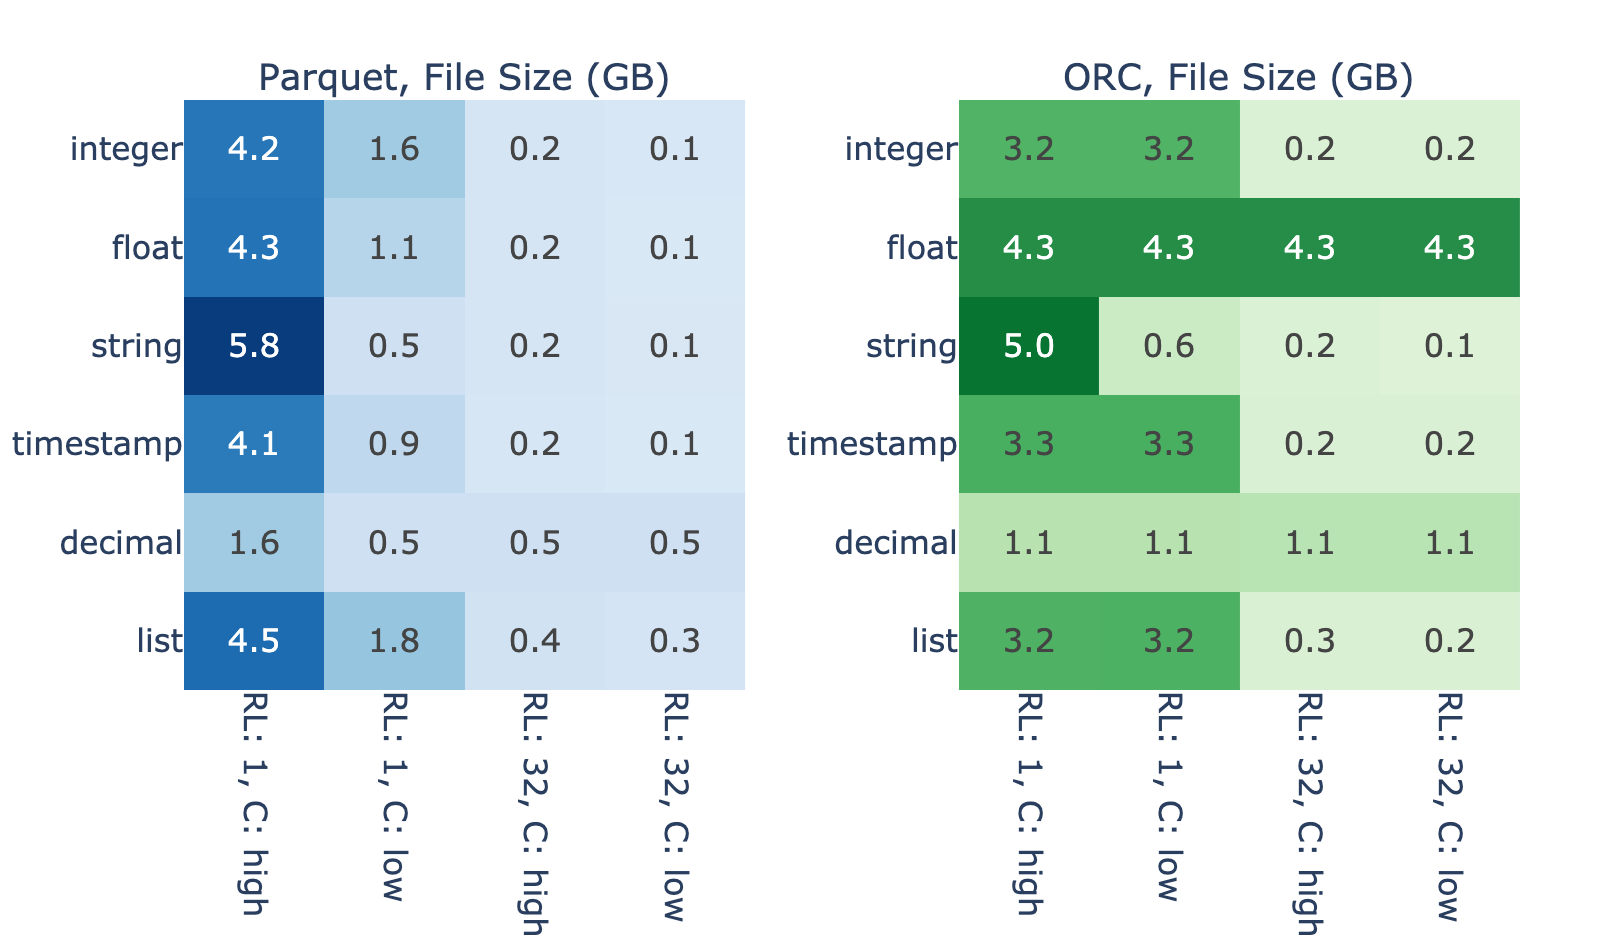 Tables show the Parquet (left) and ORC (right) file sizes for a fixed in-memory data size. Each row shows sizes for different groups of data types. Each column shows sizes for different combinations of run length and cardinality. Tables show that, depending on the data properties, file size can vary by an order of magnitude.